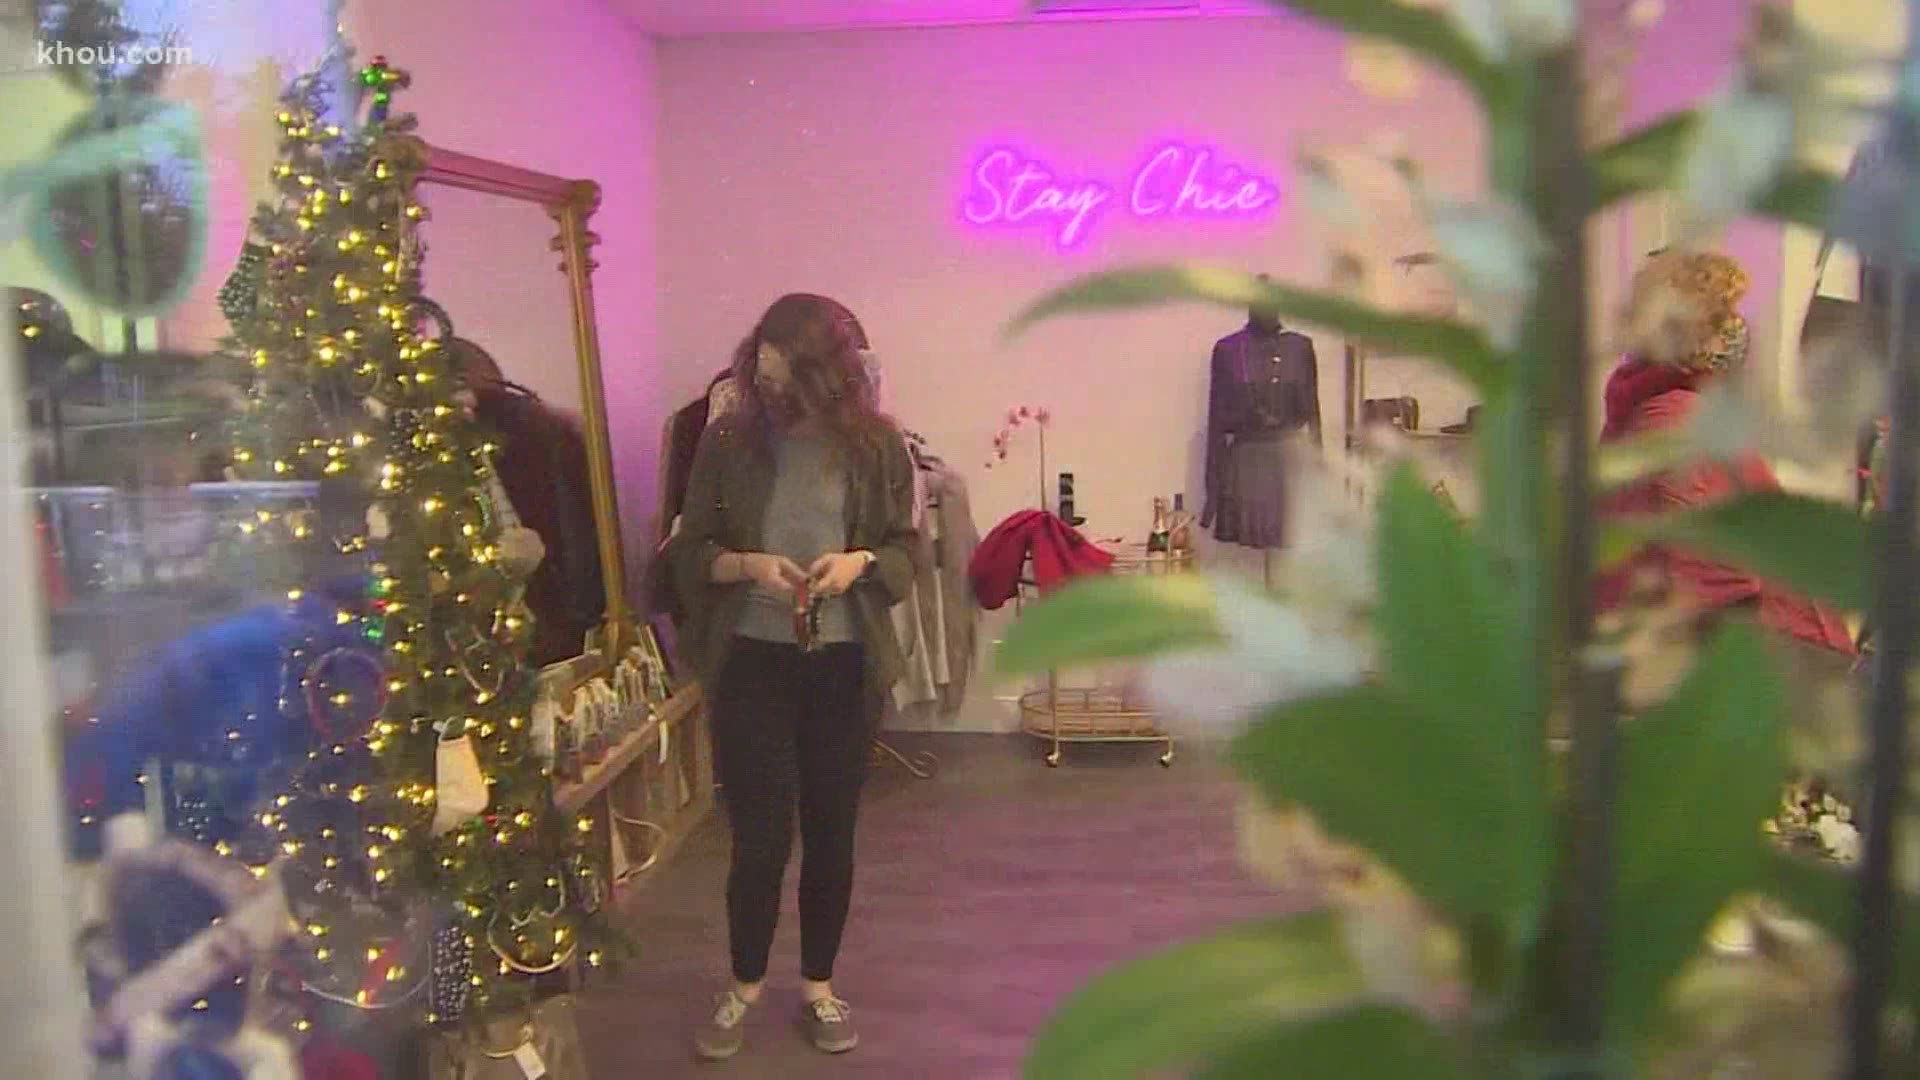 For some Houston stores on Small Business Saturday, the rain put quite a damper on their day.